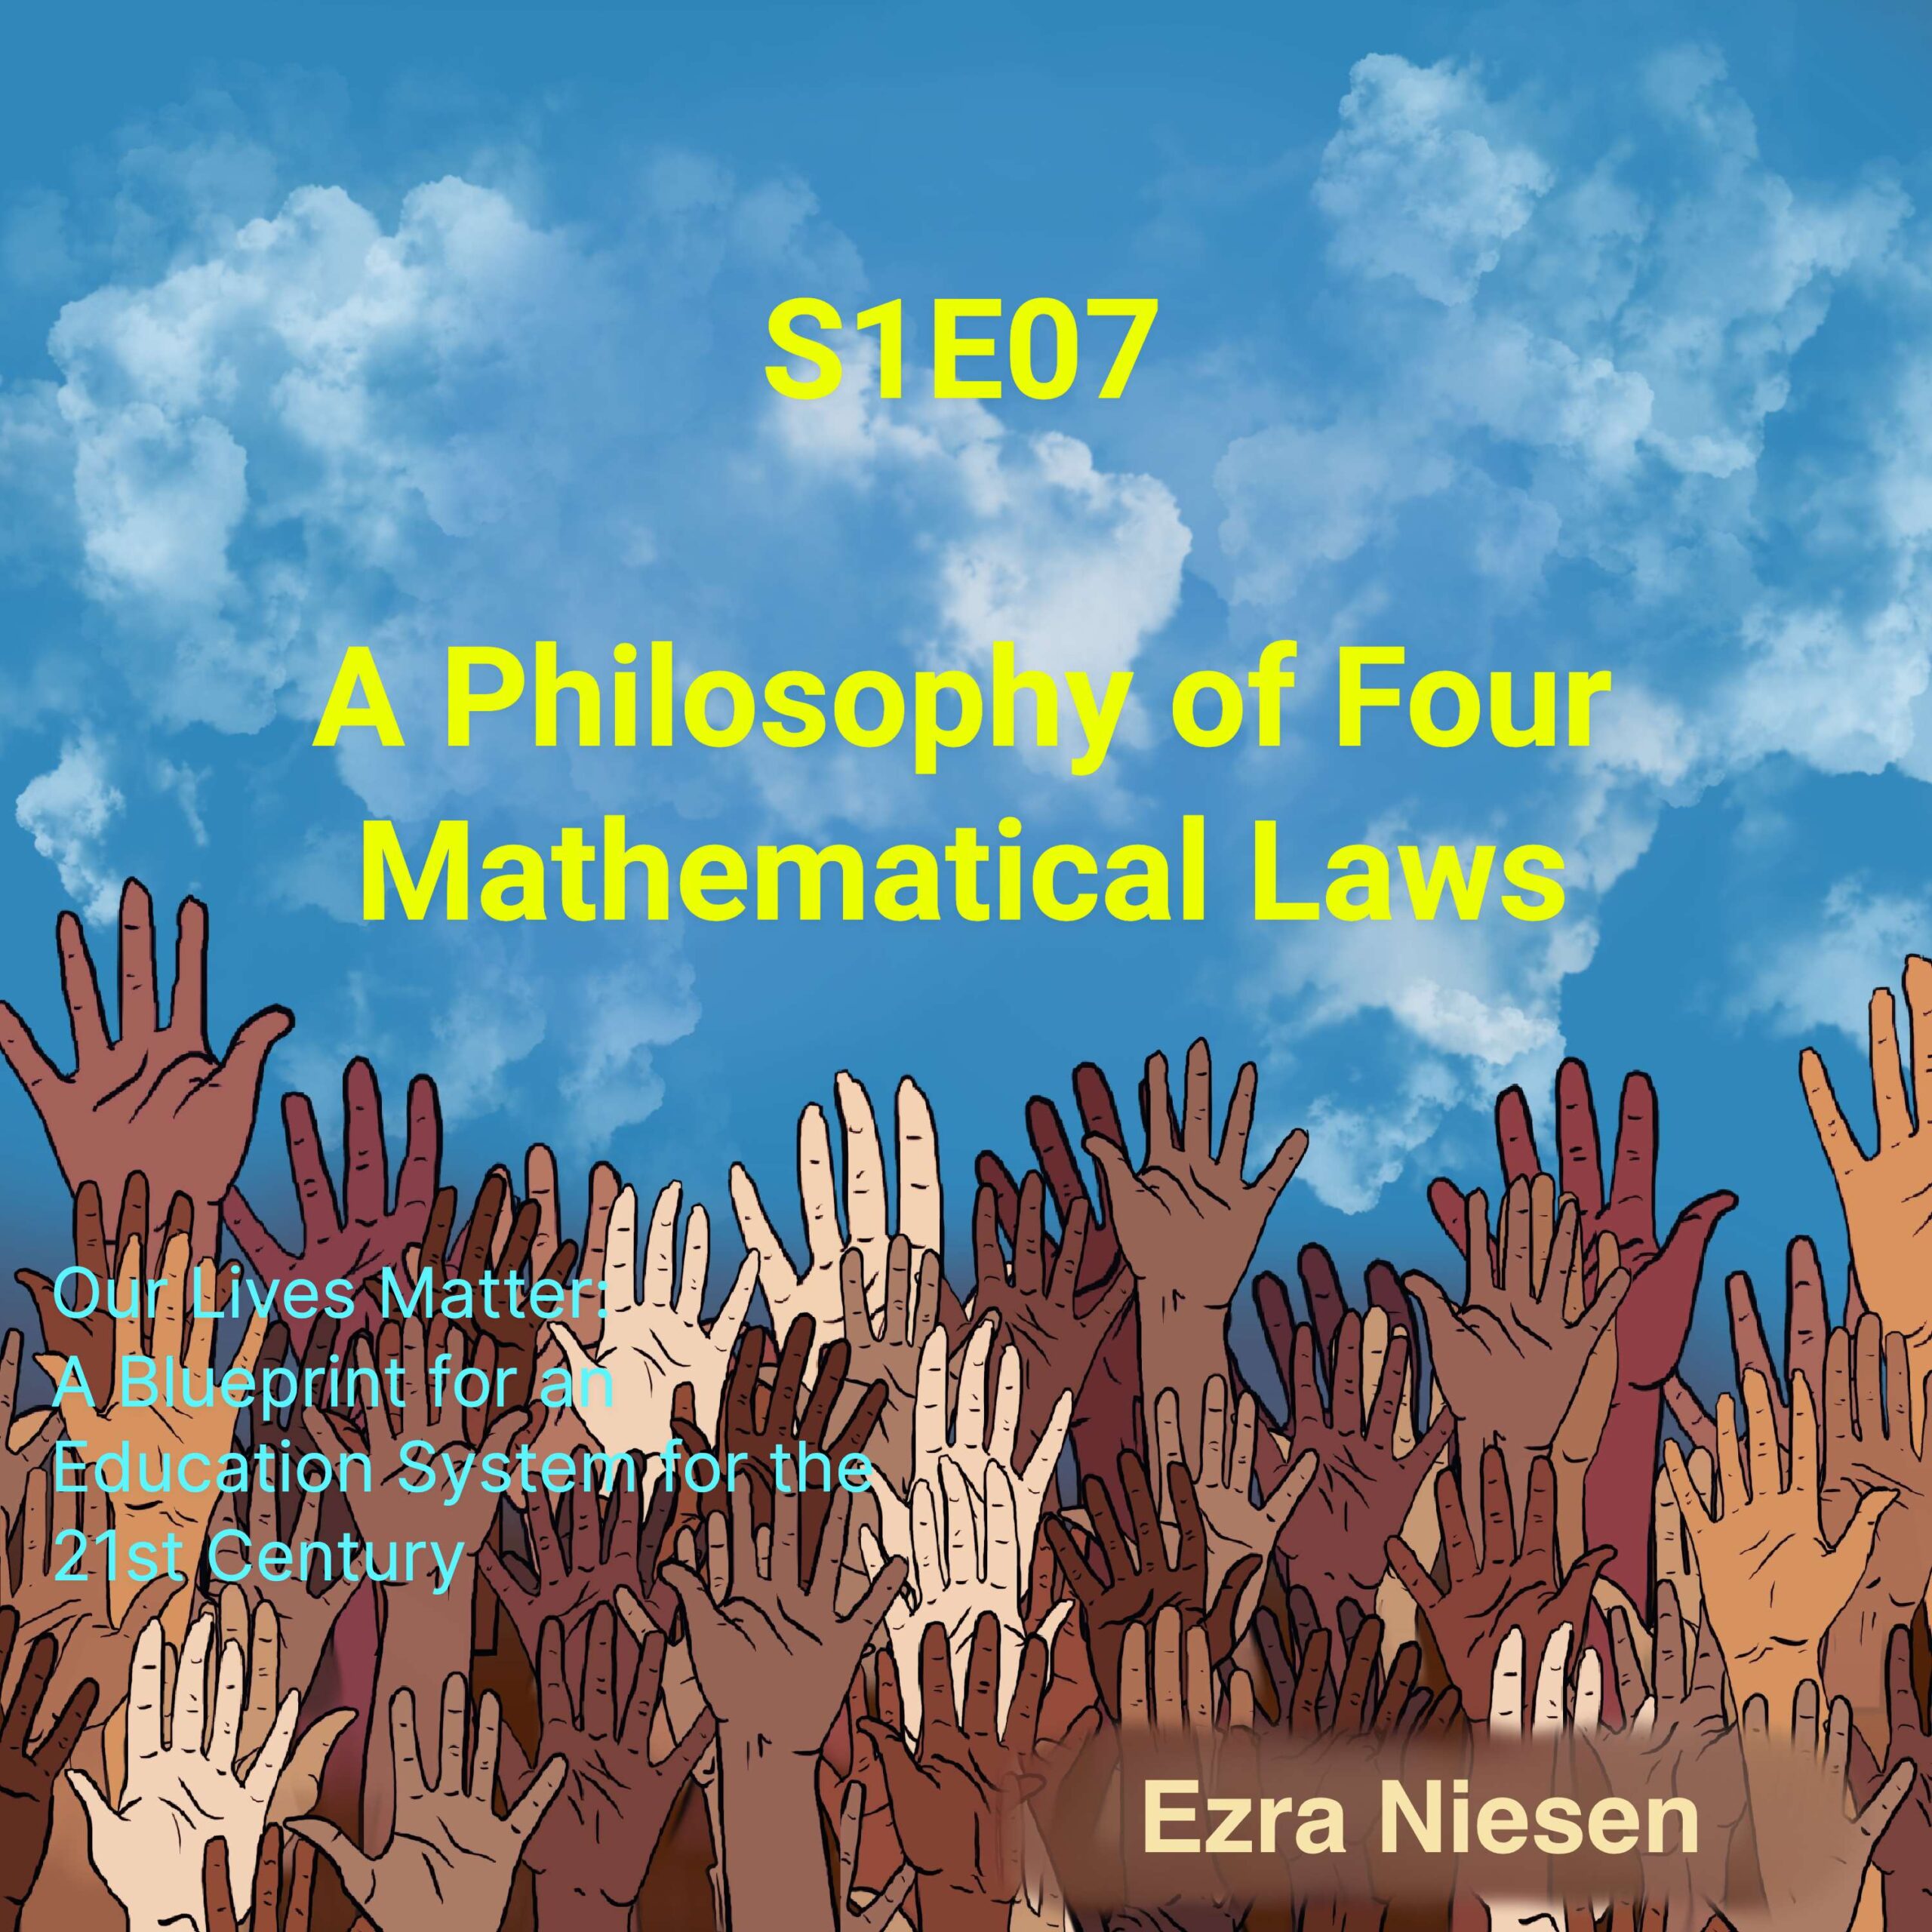 Our Lives Matter S1E07: A Philosophy of Four Mathematical Laws